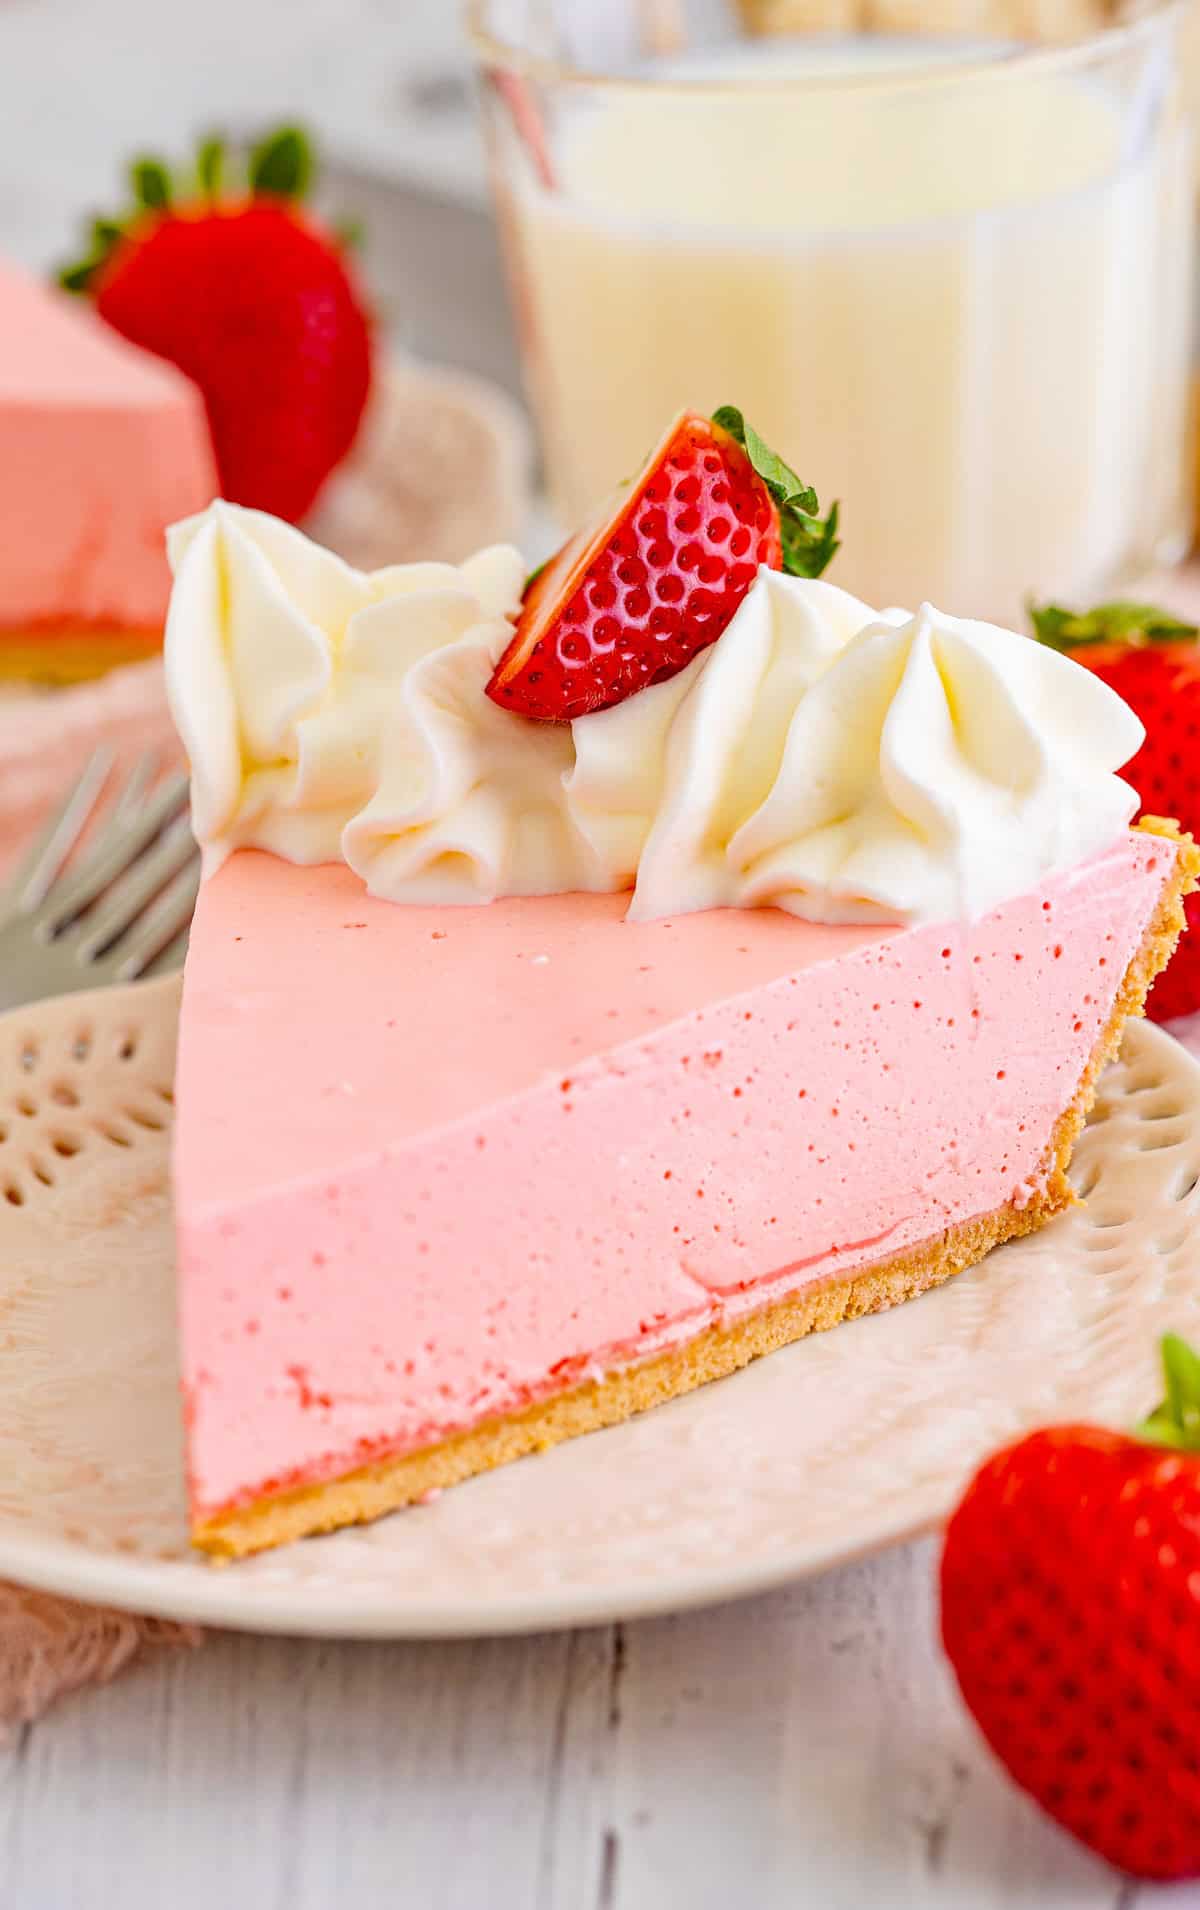 A slice of Strawberry Jello Pie on white plate with whipped topping and sliced strawberry with milk and strawberries around plate.